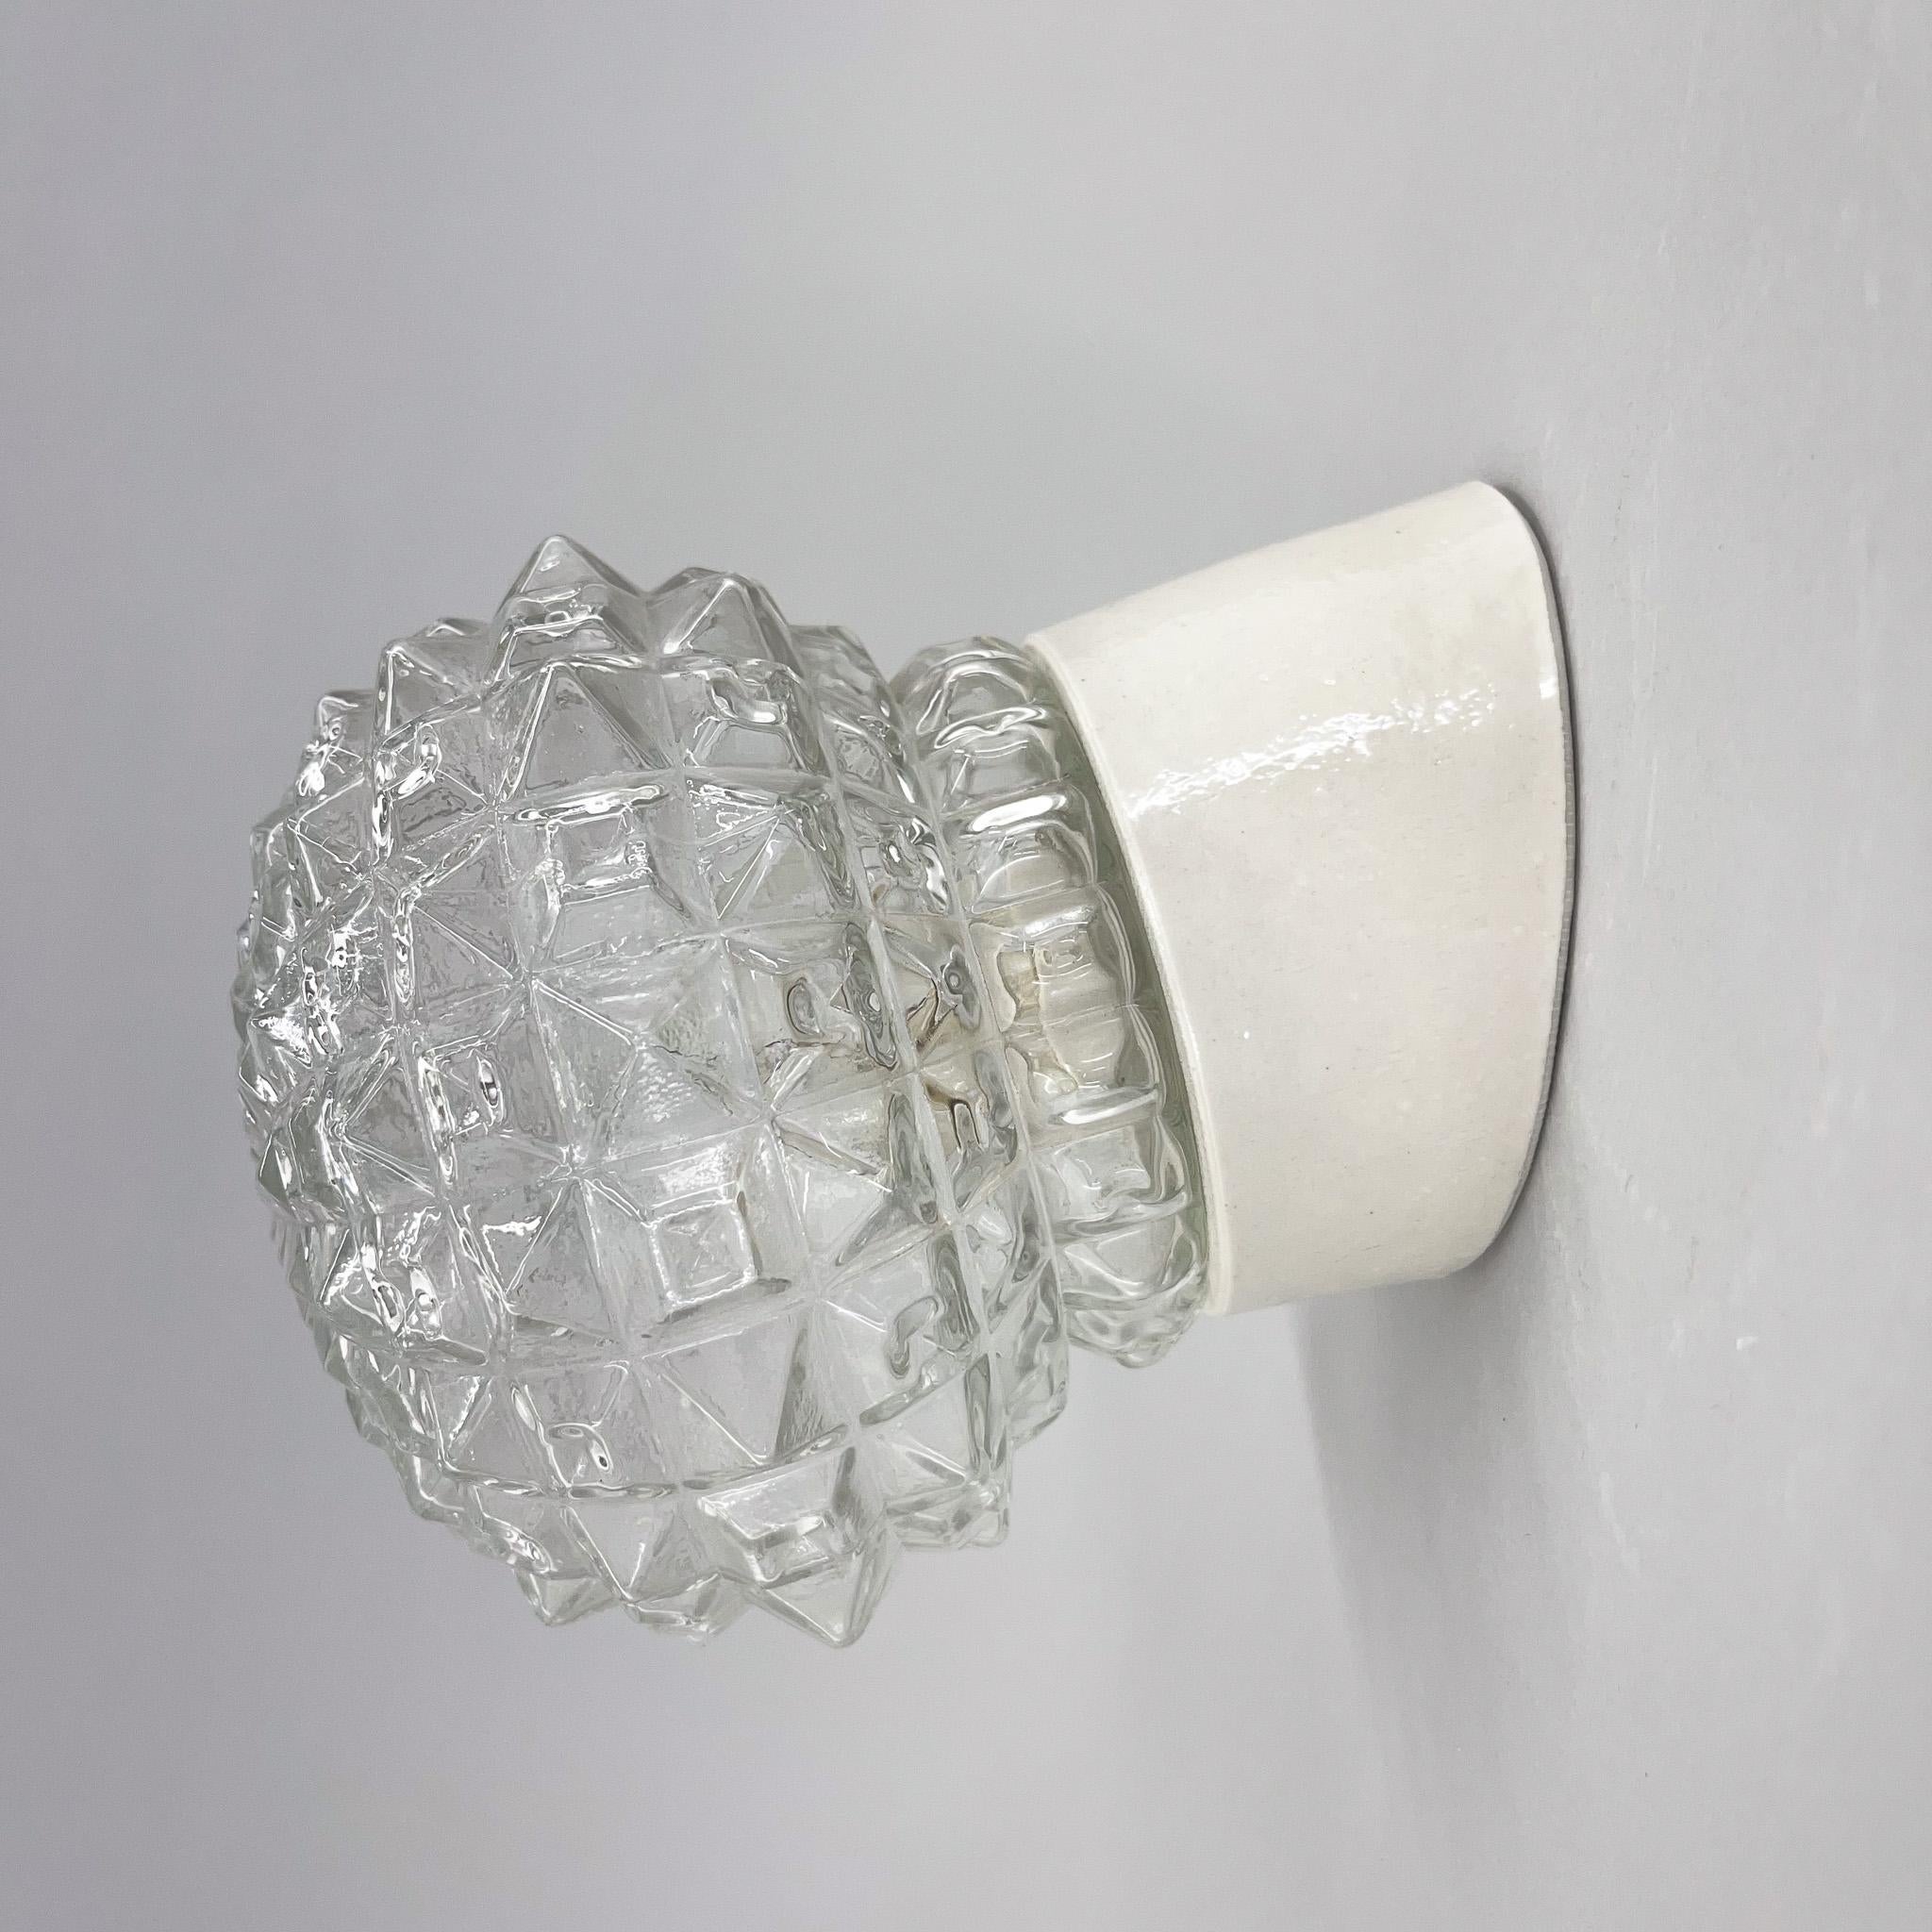 Vintage wall light with ceramic base and lamp shade made of clear pressed glass. New wiring.